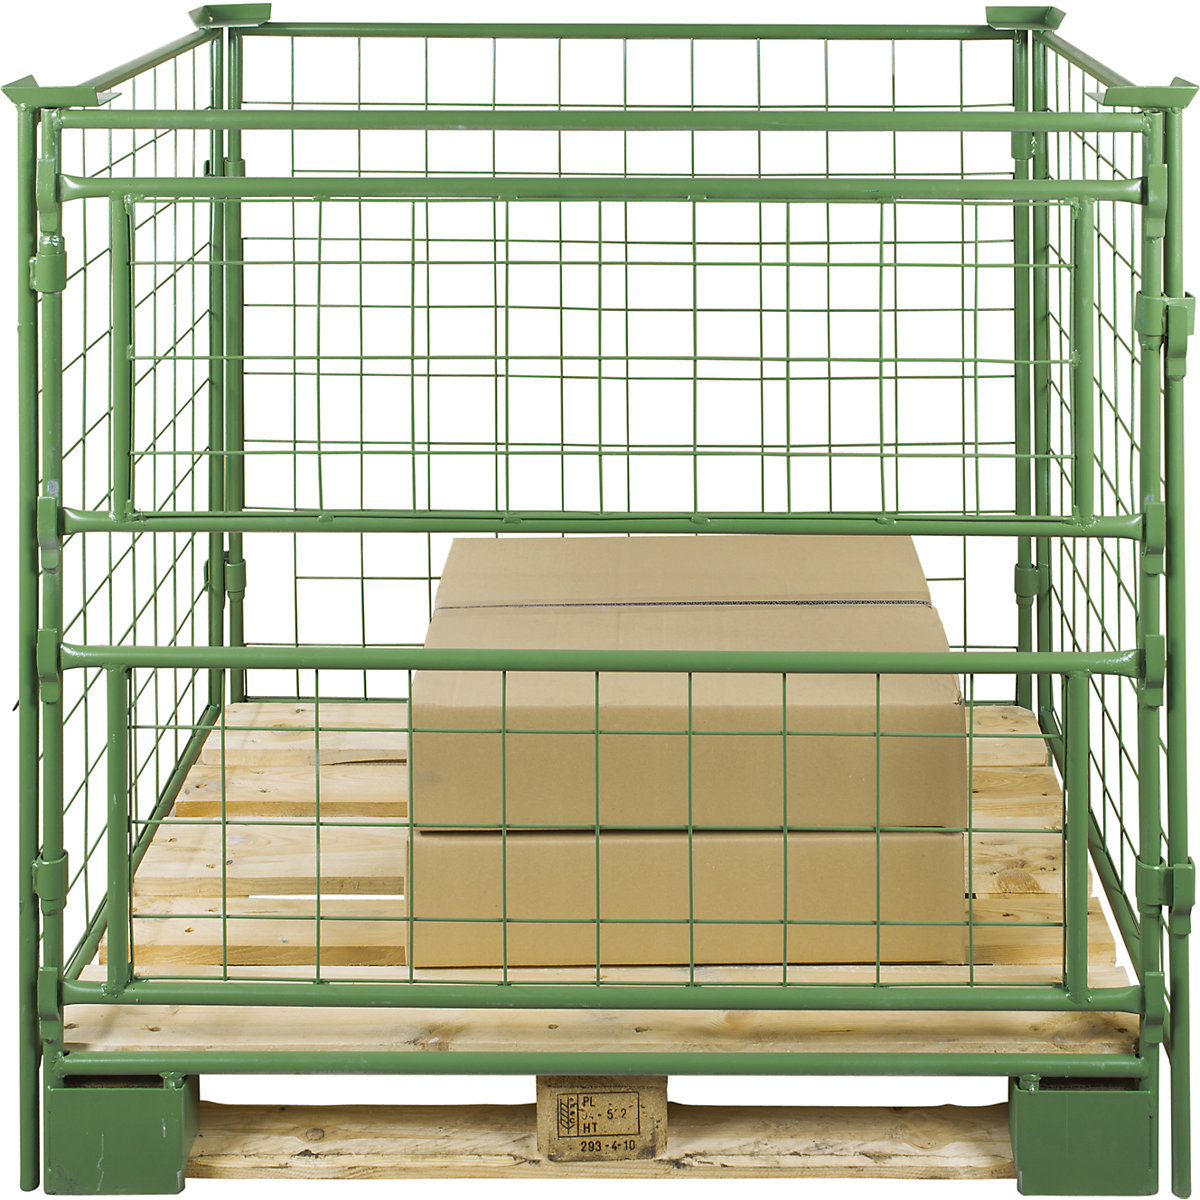 Pallet frame, effective height 1000 mm, for attaching, WxL 800 x 1200 mm, 1 long side with 2 parts, removable